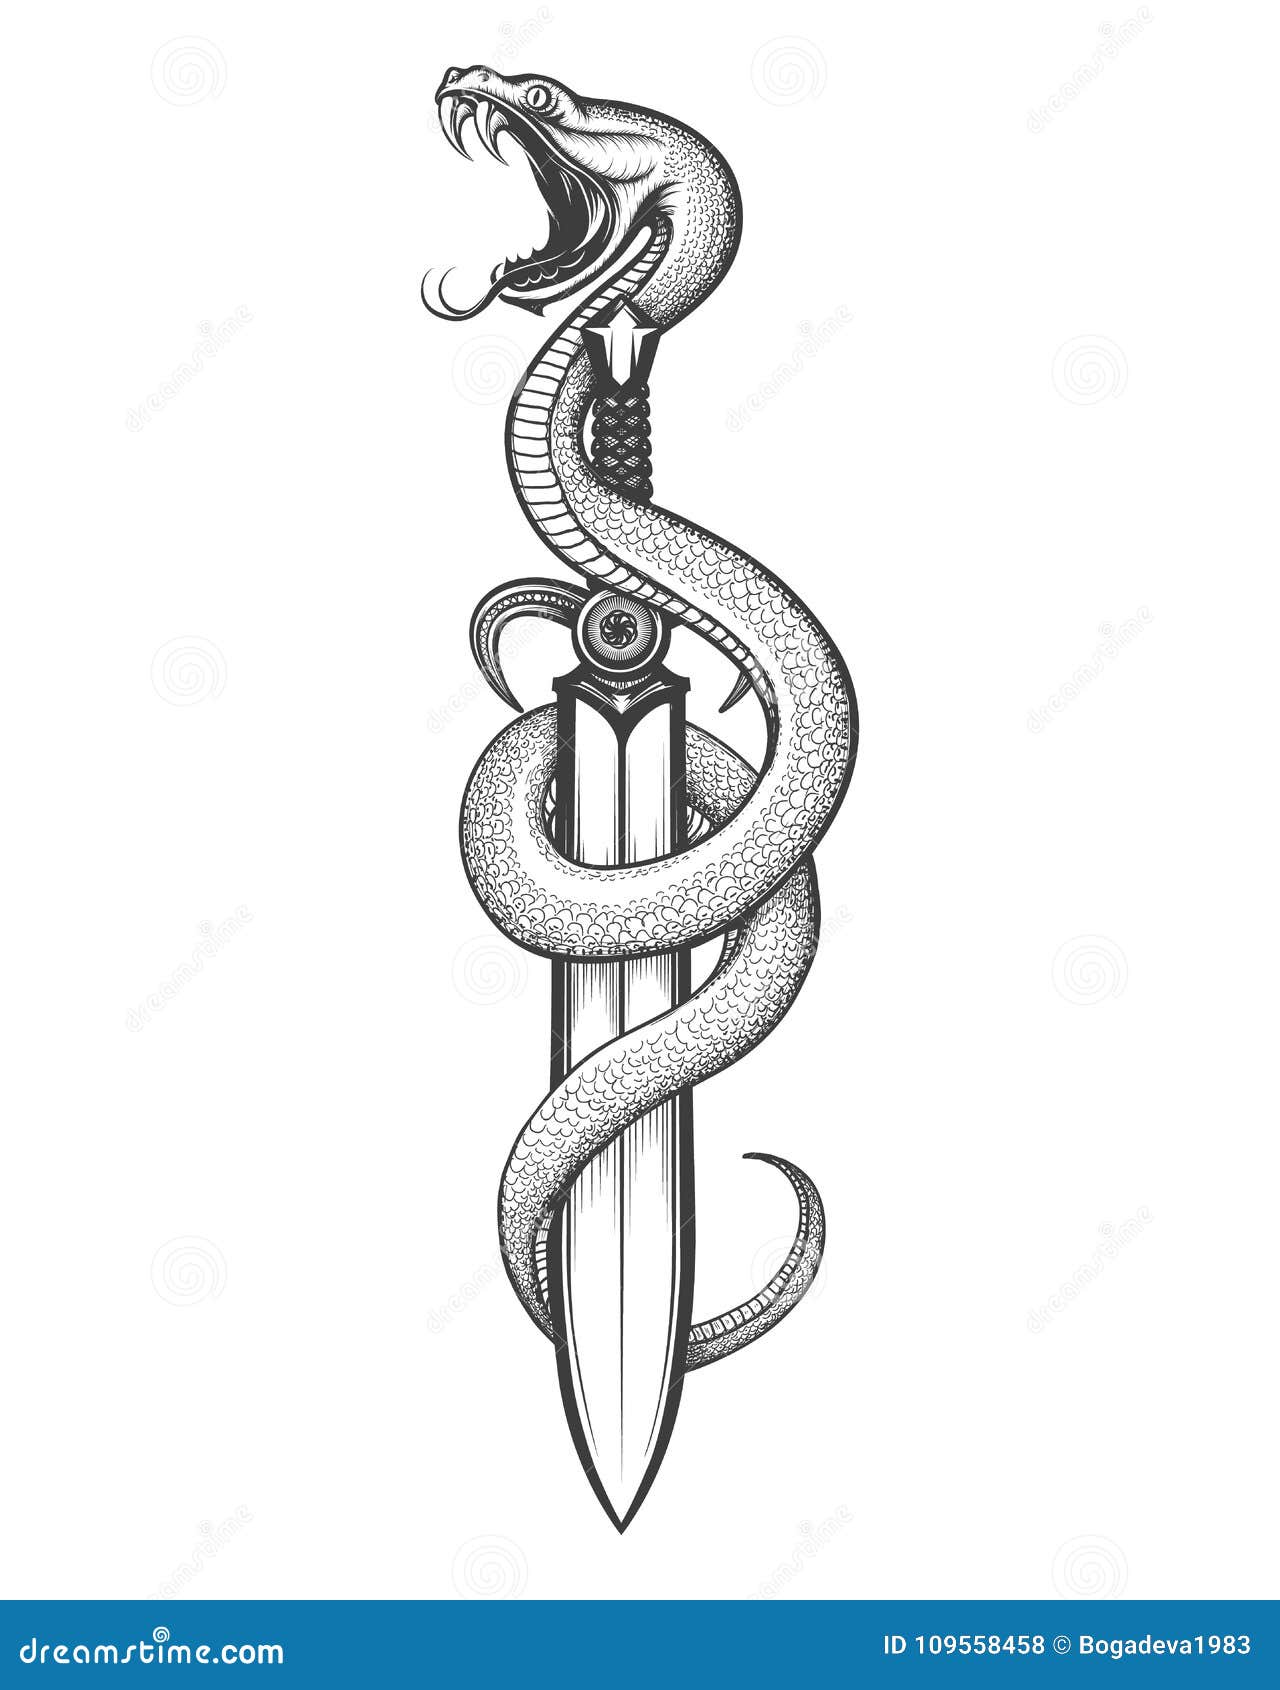 Snake on a Sword tattoo stock vector. Illustration of icon - 109558458